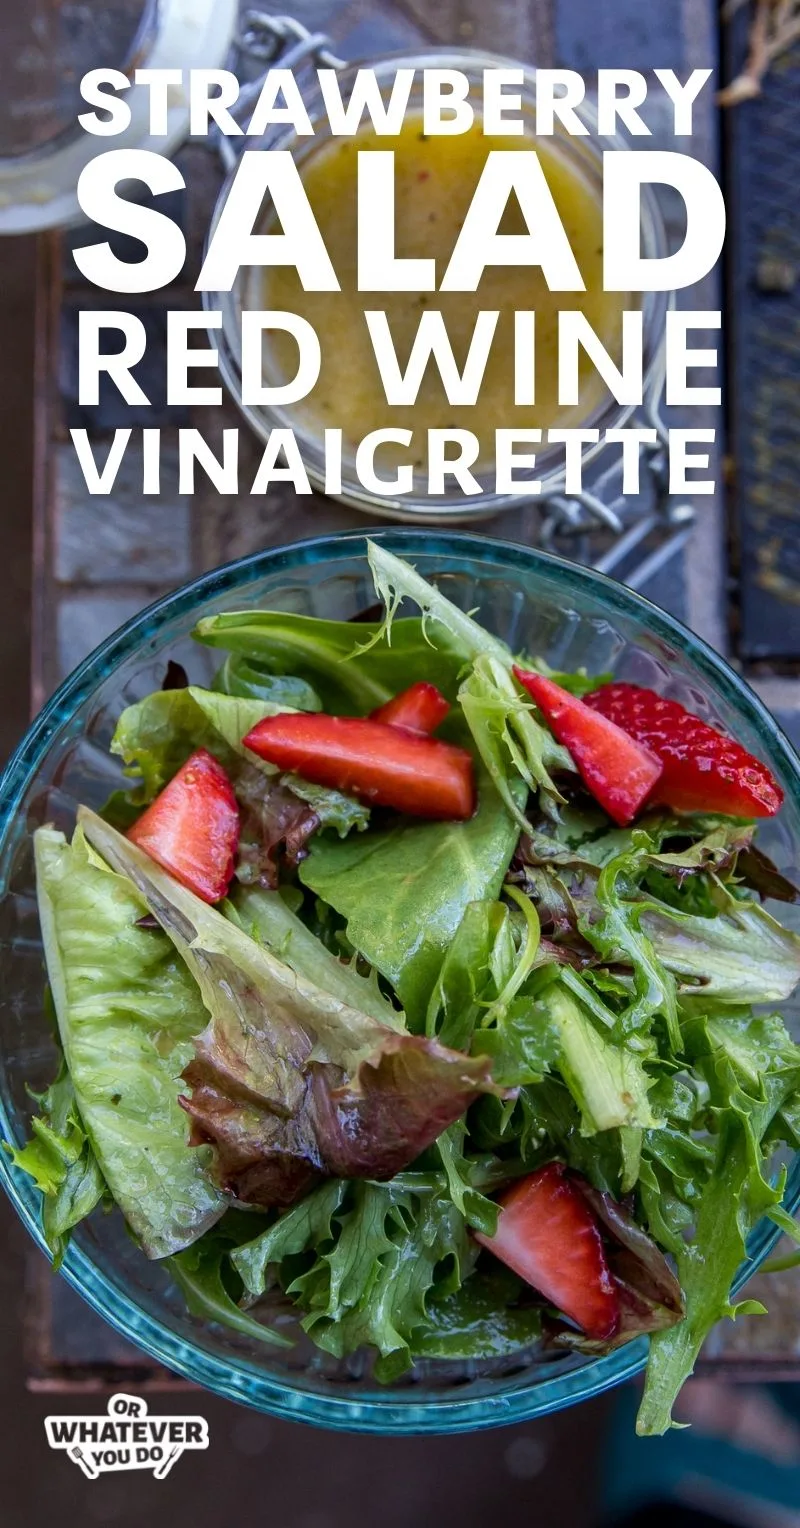 Homemade Red Wine Vinaigrette for Salads and More - Street Smart Nutrition